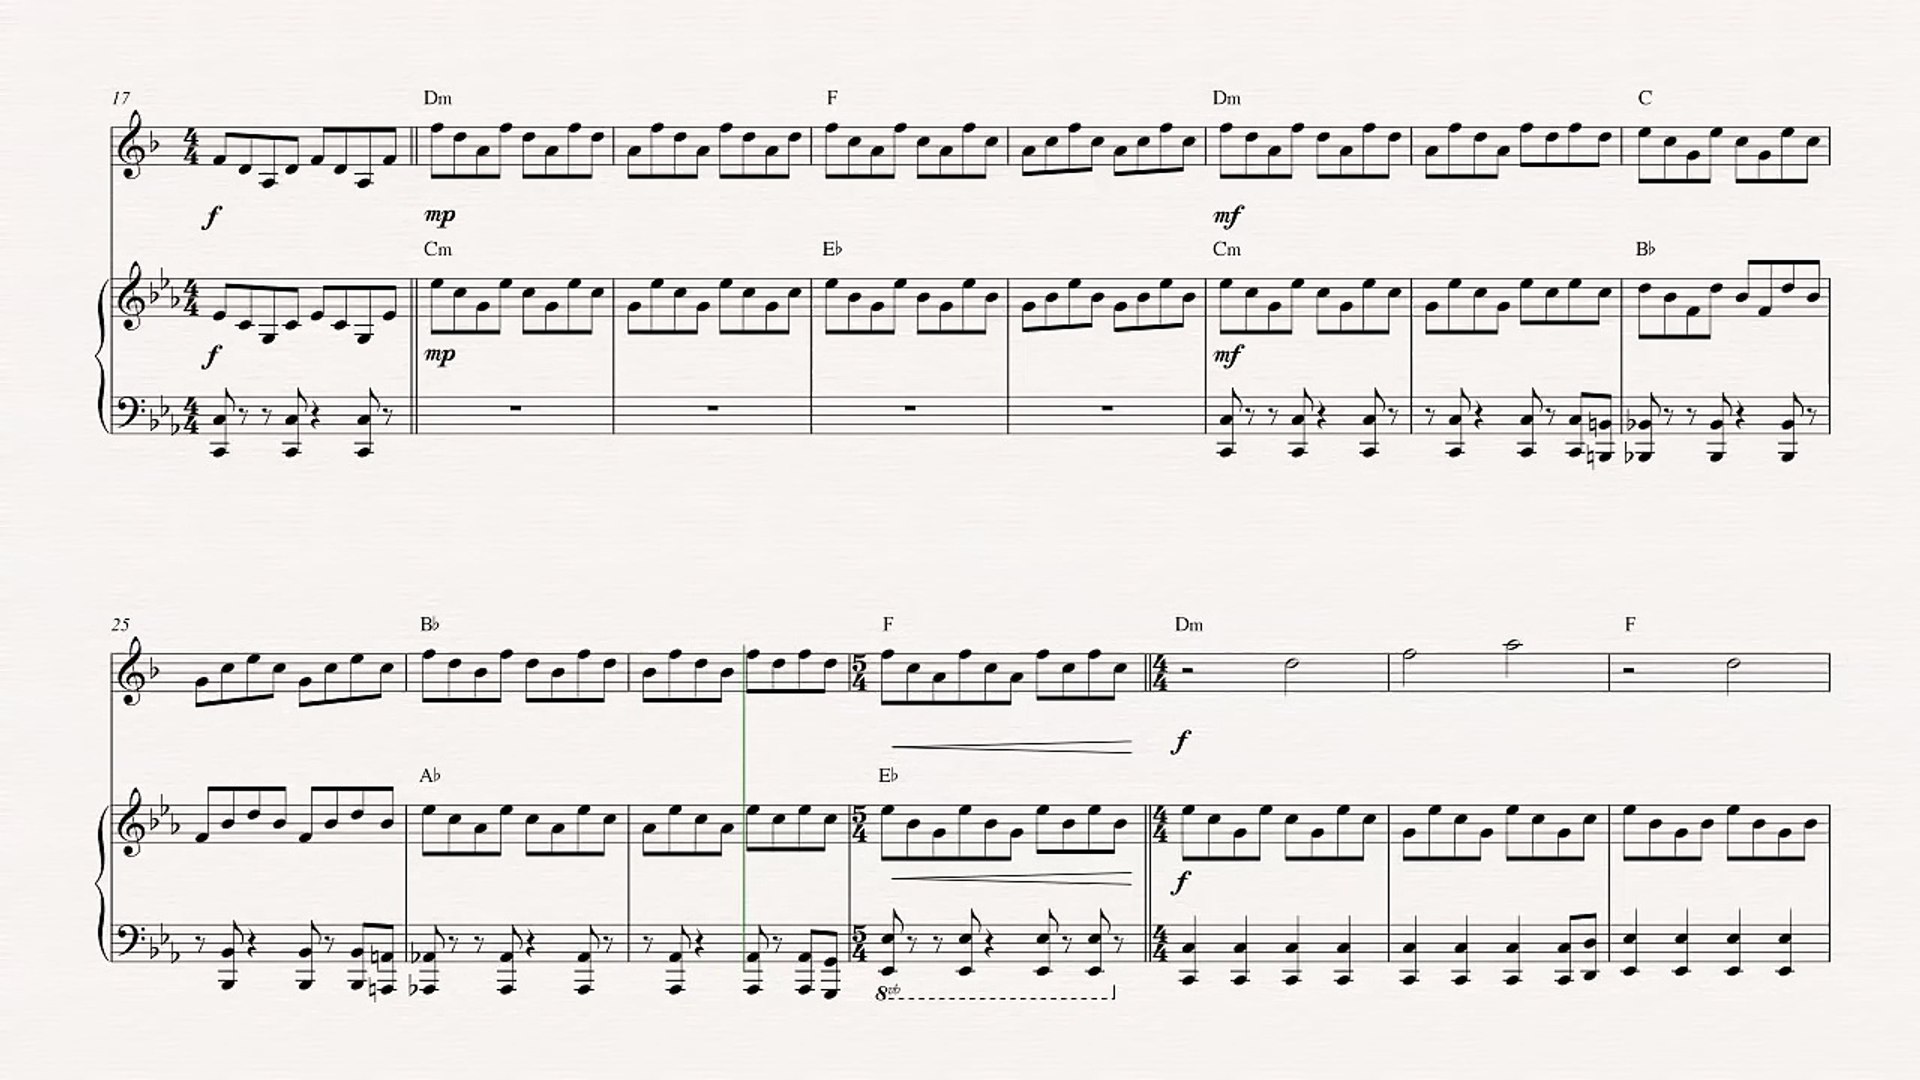 Clarinet Gravity Falls Theme Song Gravity Falls Sheet Music Chords Vocals Video Dailymotion